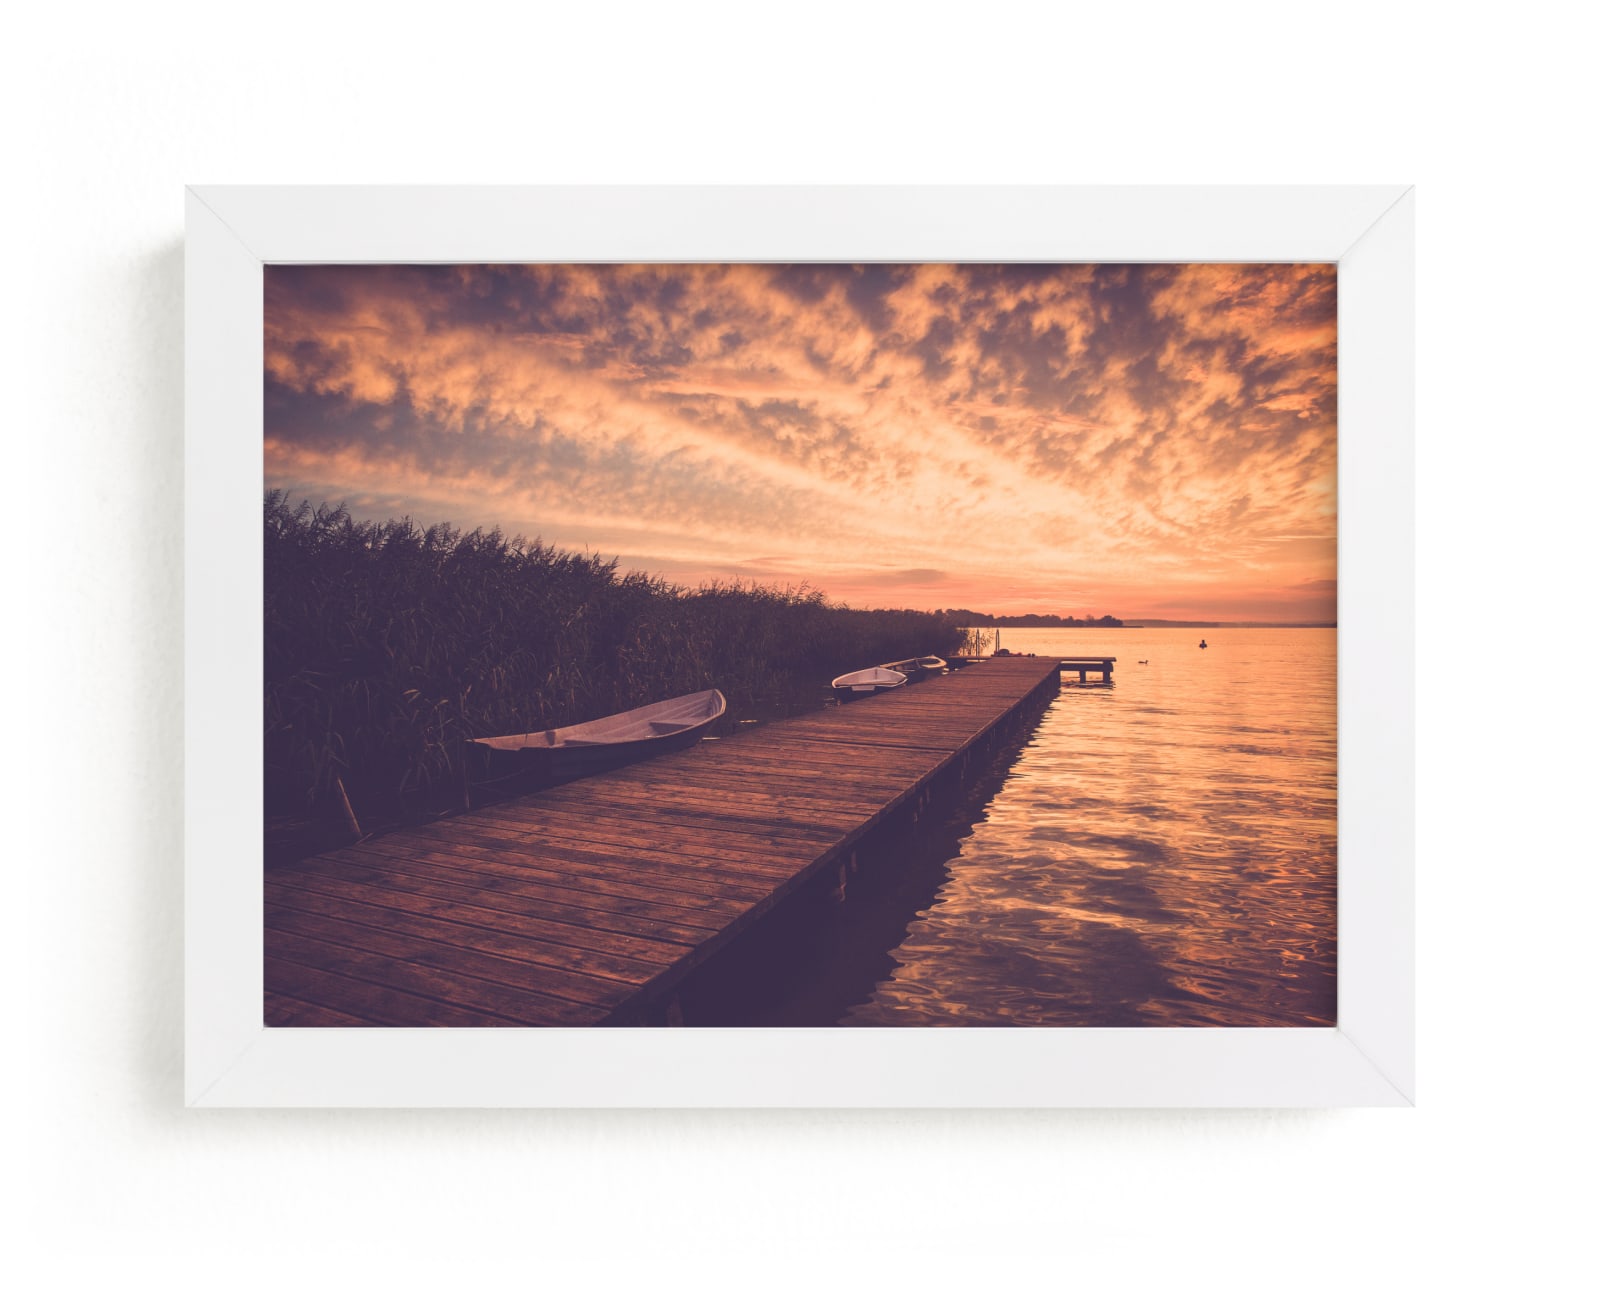 "Red sunset and boat" by Lying on the grass in beautiful frame options and a variety of sizes.